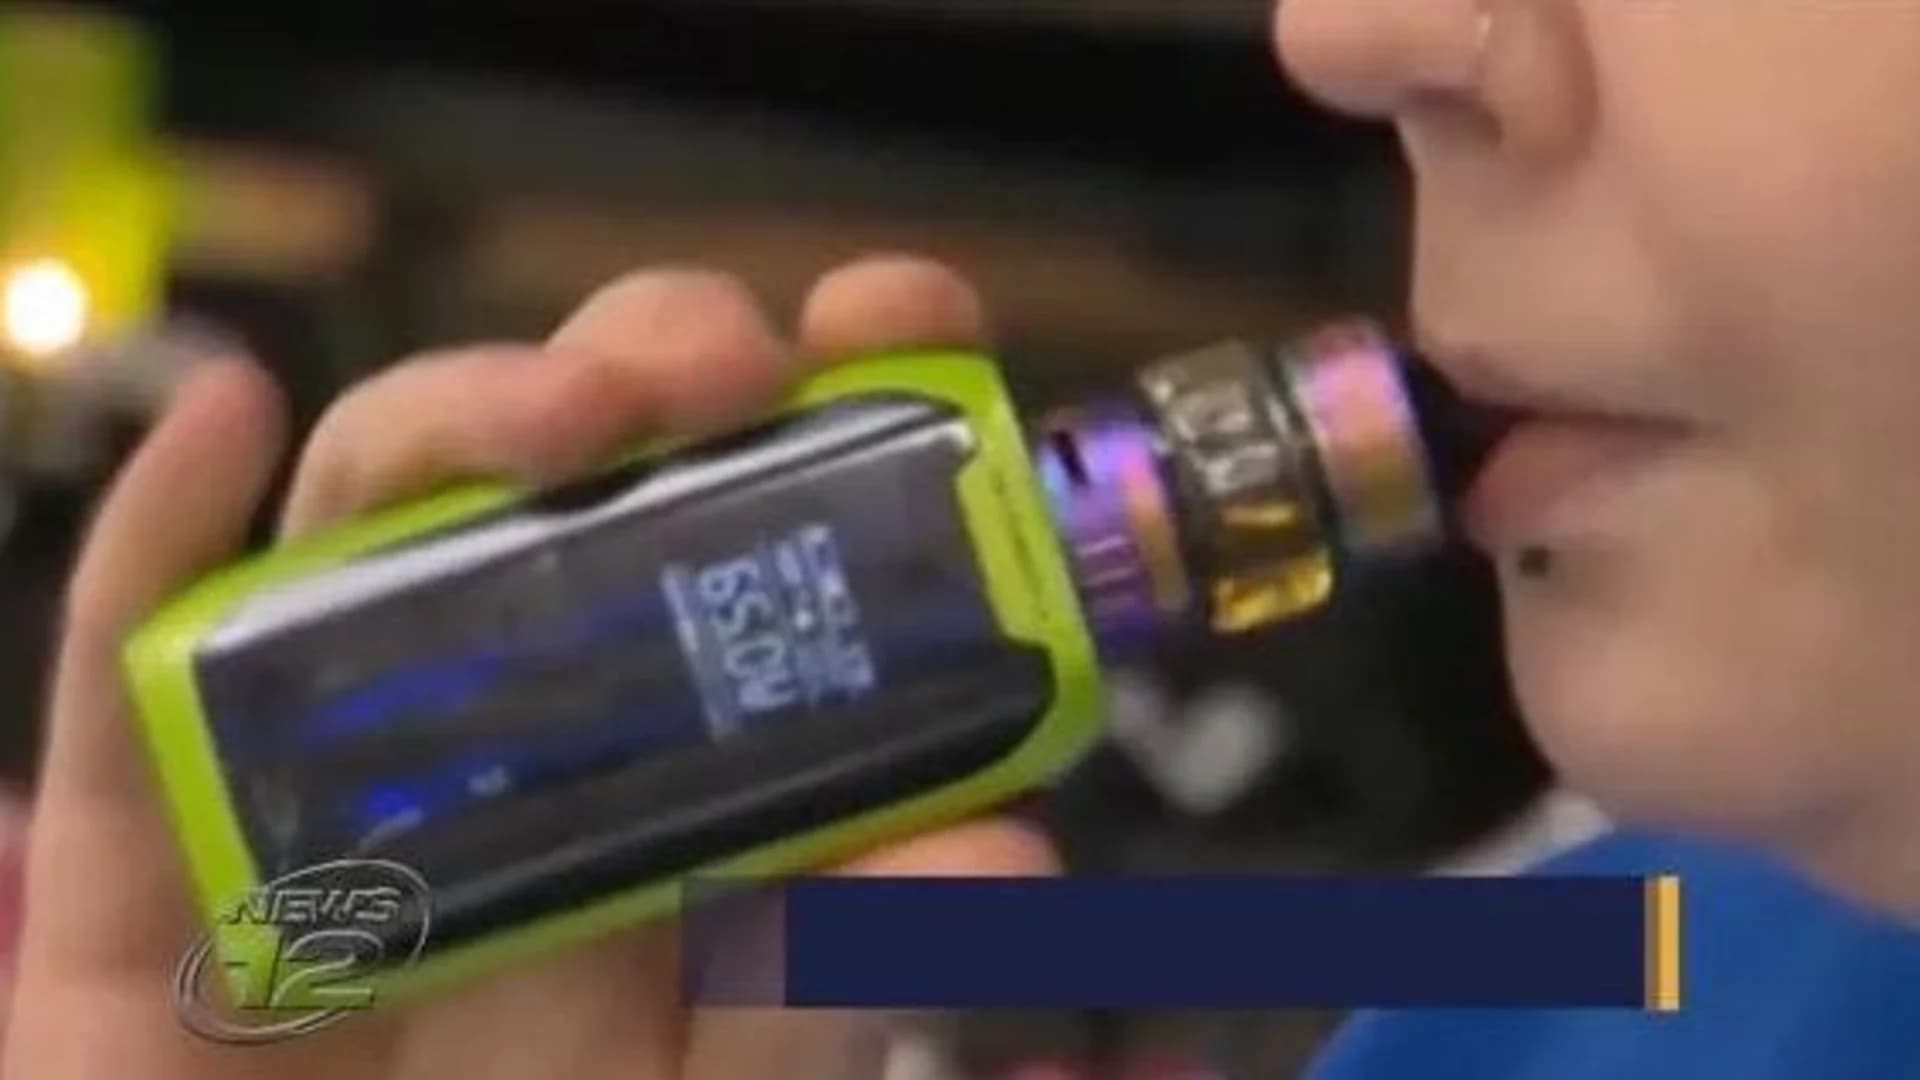 Westchester considers banning all flavored e-cigarettes and vaping products